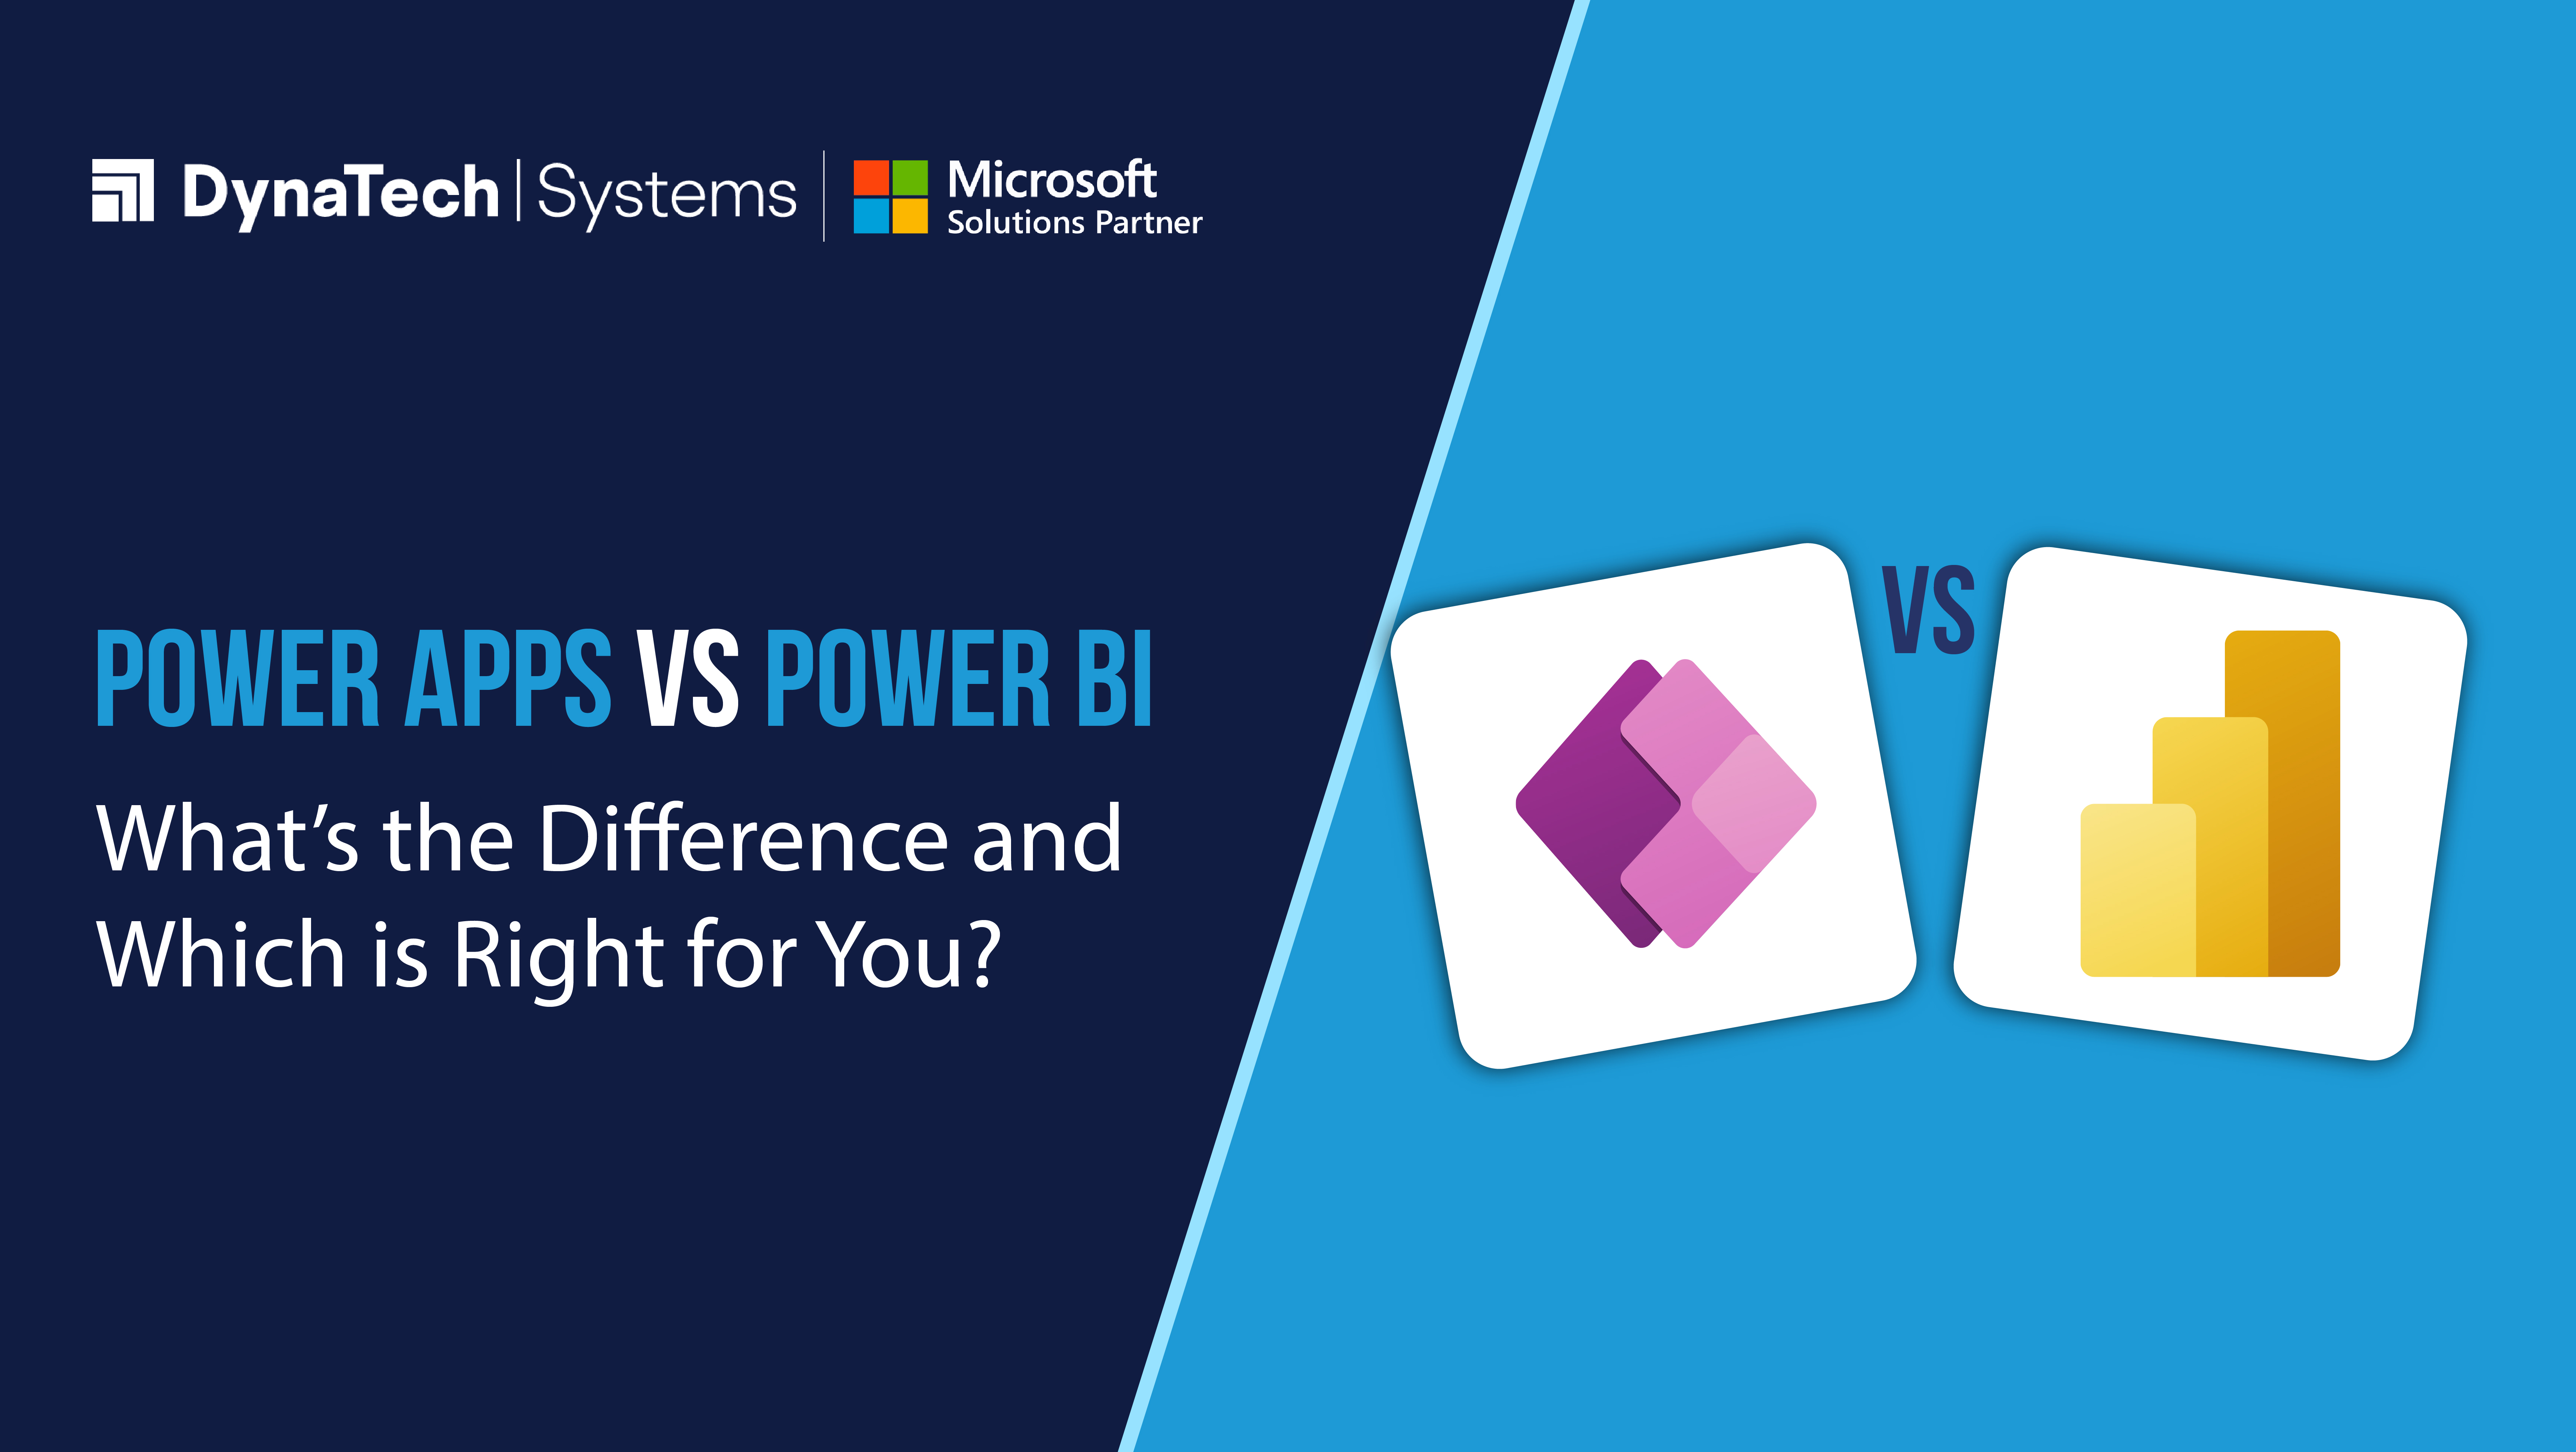 Power Apps vs Power BI: What’s the Difference and Which is Right for You?